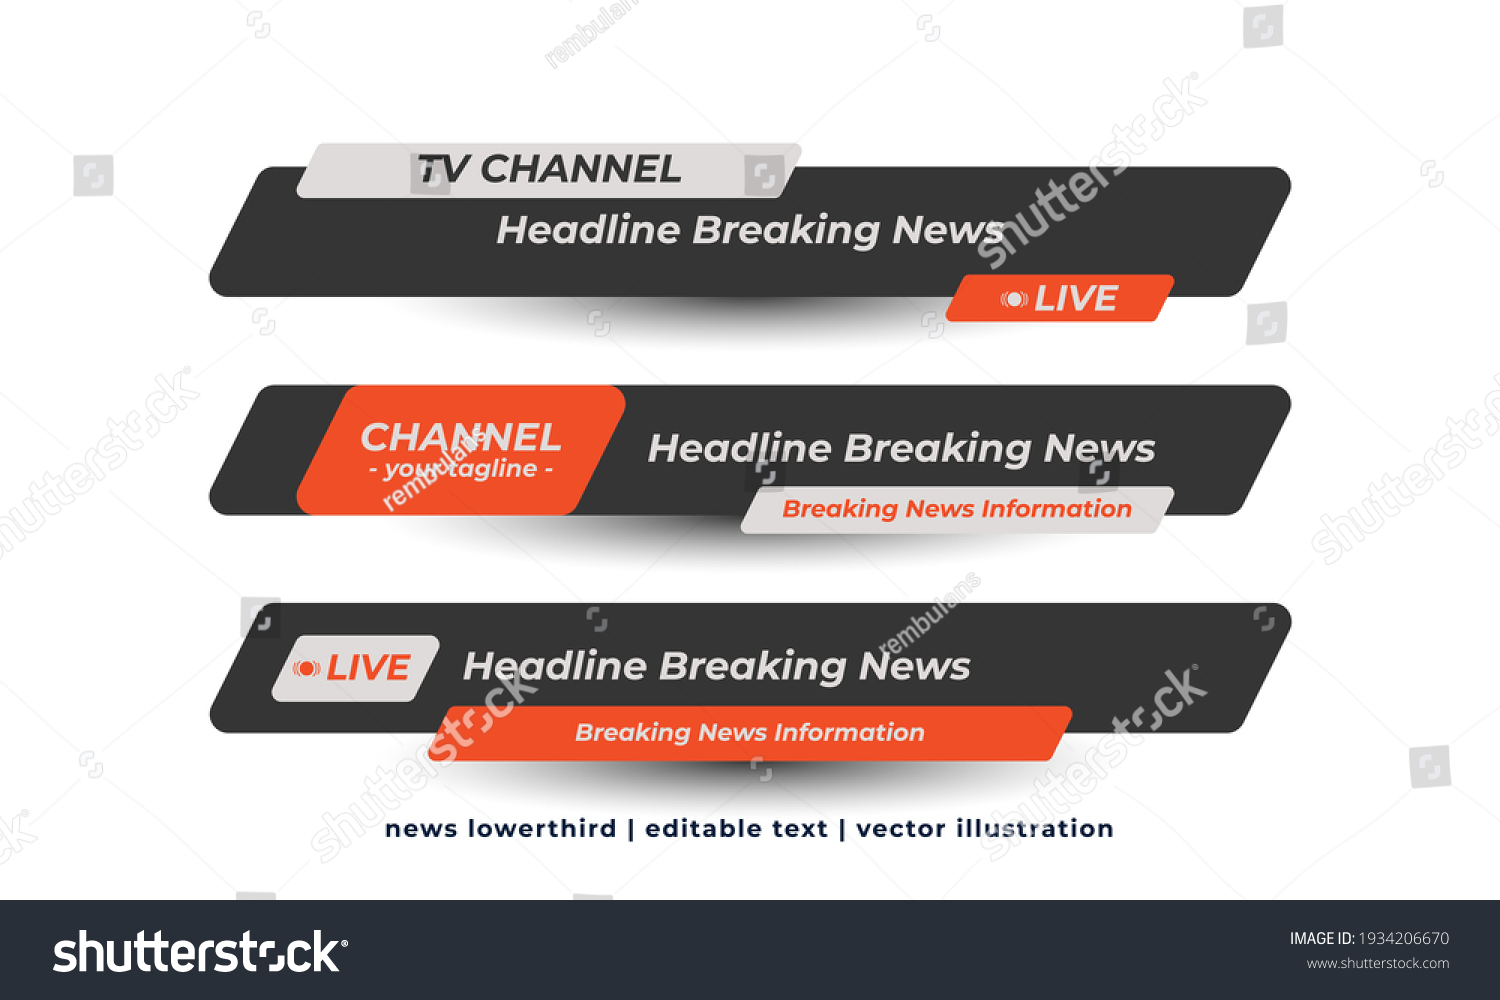 Lower third template. TV header mockup. Television news. Elegant and fancy lower third design. Breaking news template with text. Isolated object media mockup box. Vector illustration EPS 10 #1934206670